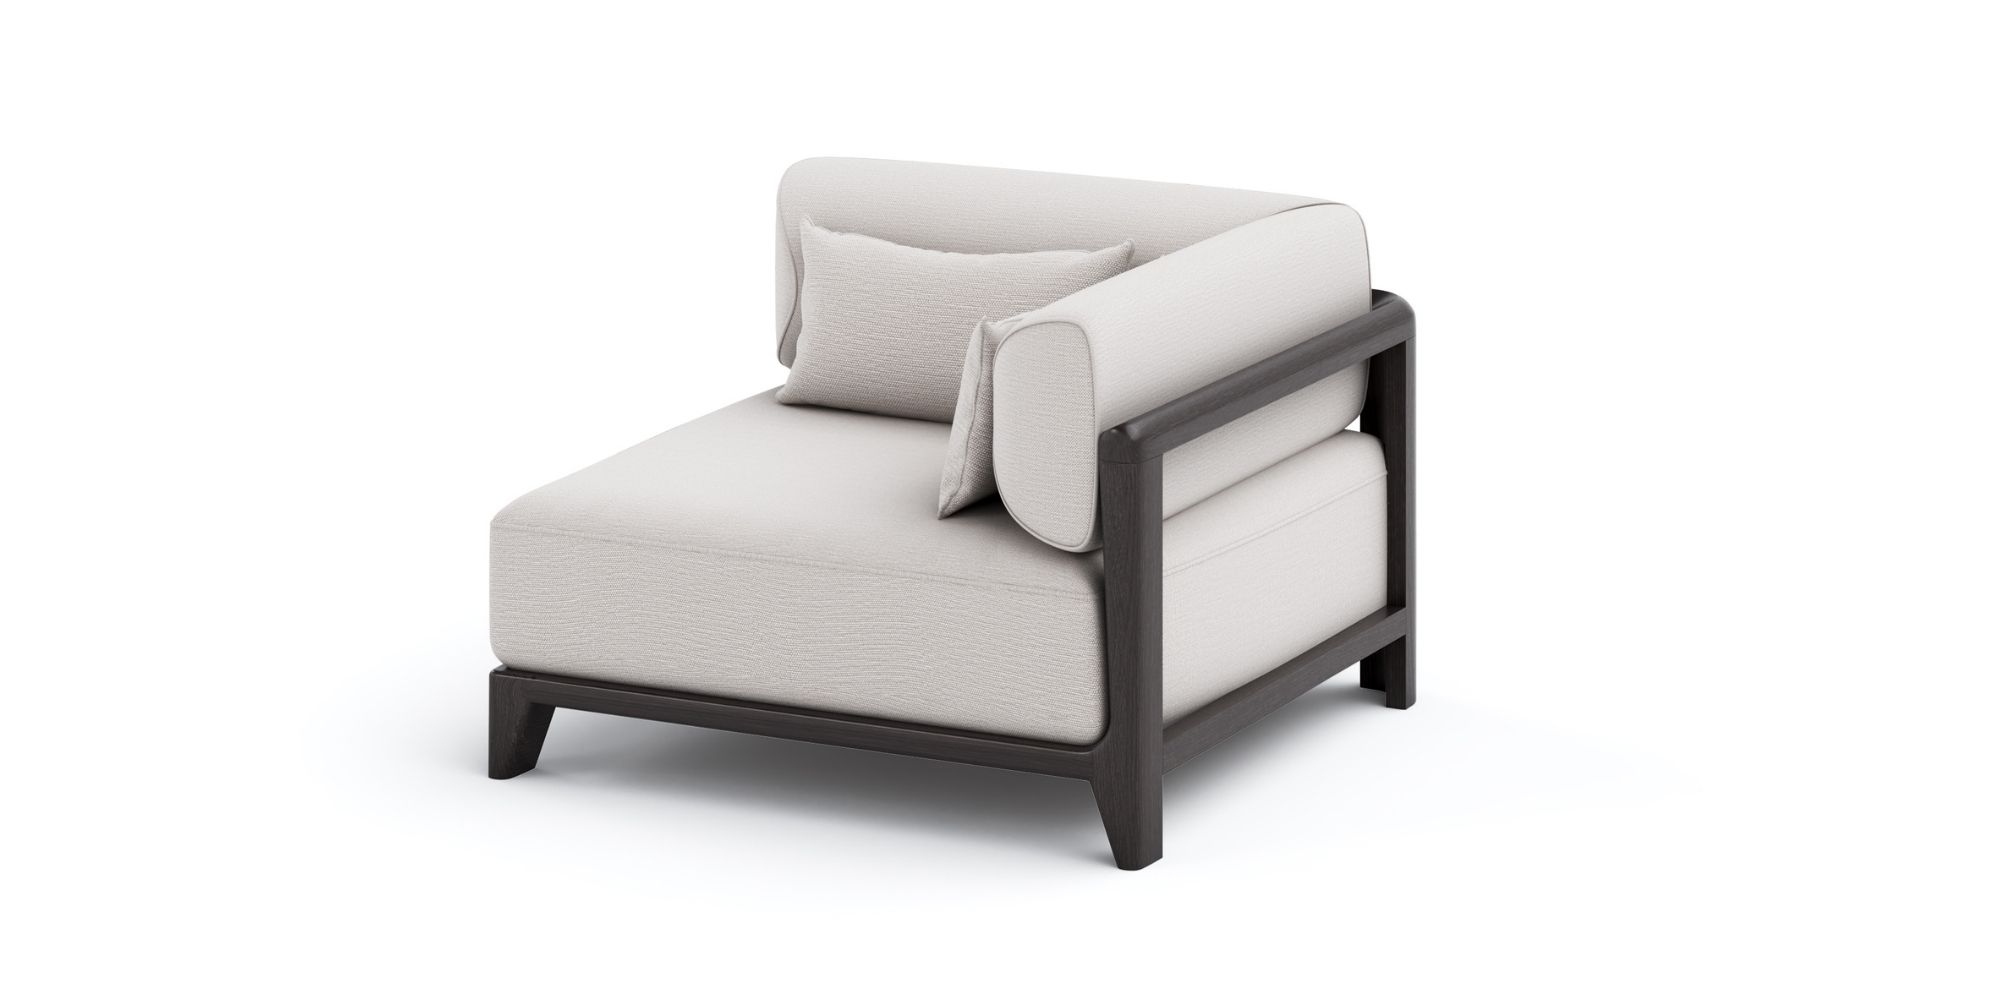 Porto Right Arm/End Section 3 Seater in Outdoor Modular Sofas for Porto collection